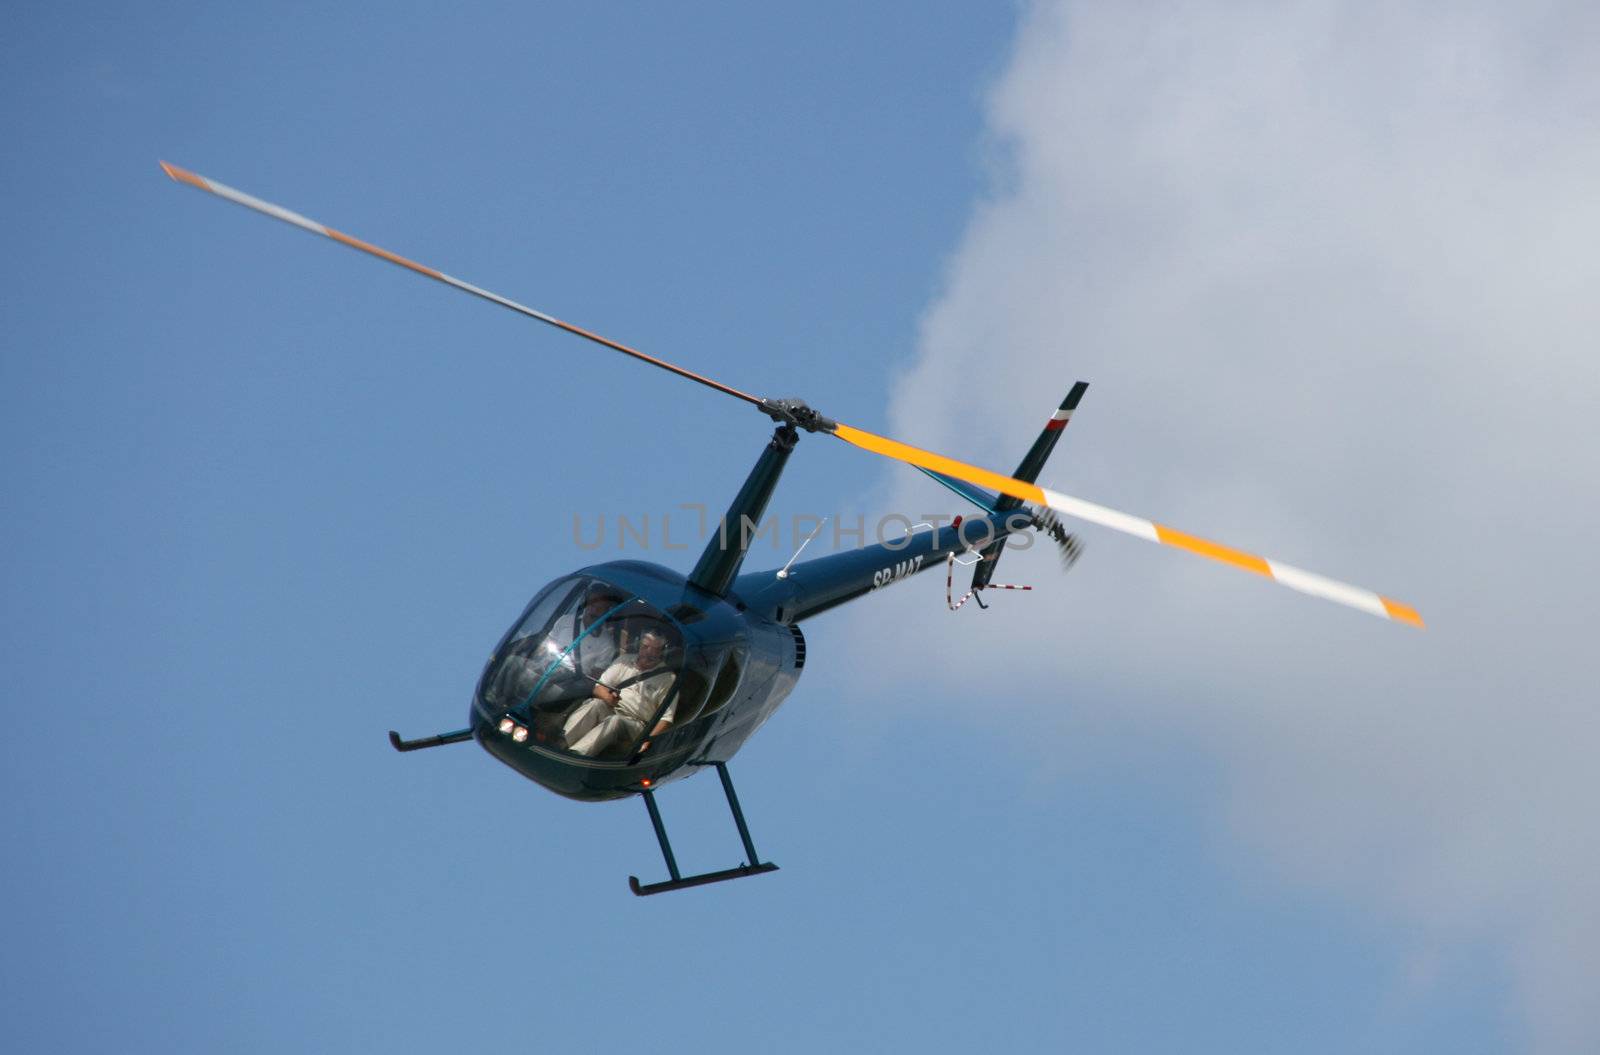 Private dark blue light helicopter on a sunny day. Aviation photo.